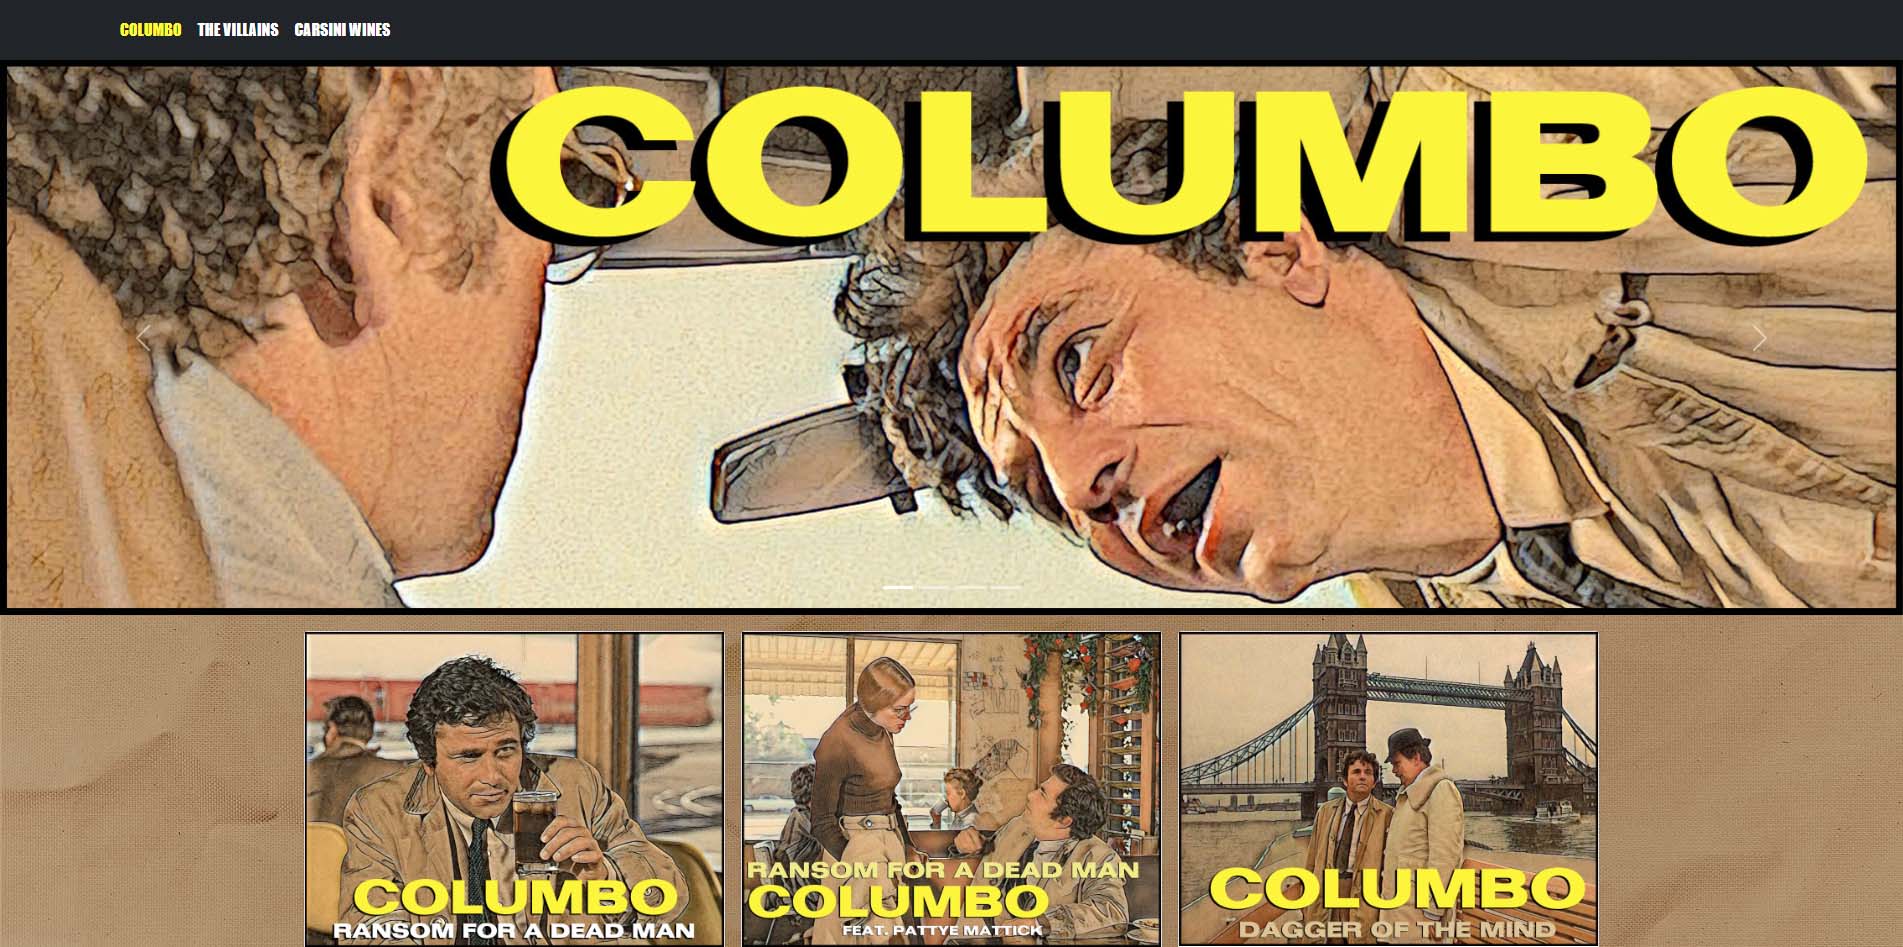 Columbo Villains.com - A fan-boy website we built out of our love for Columbo 